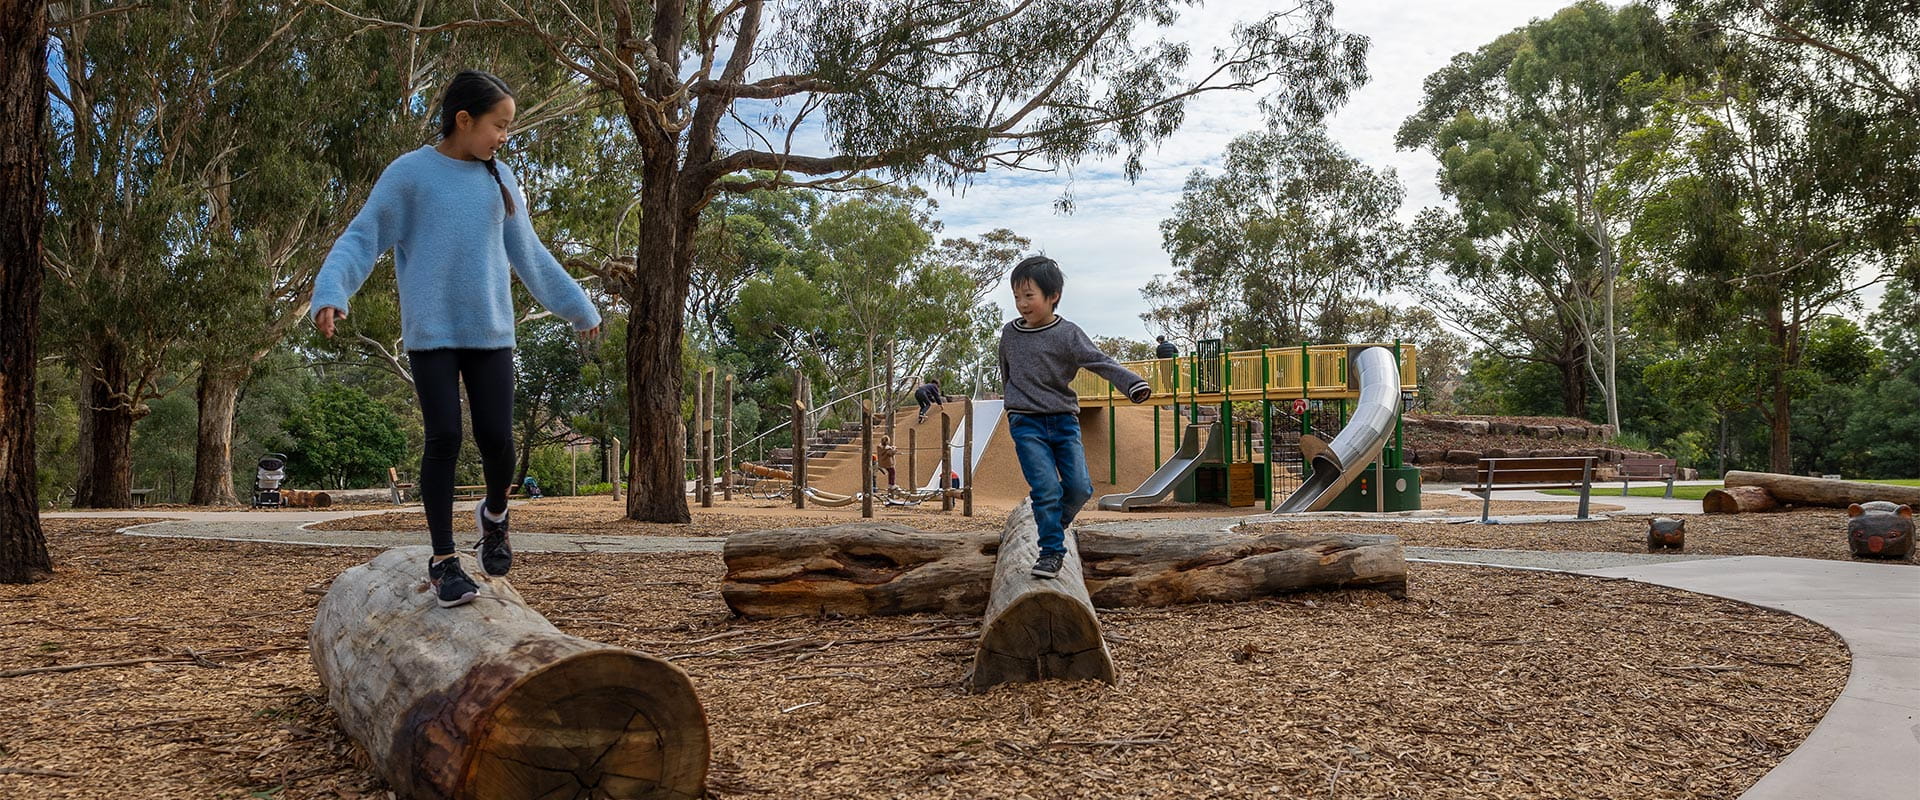 Two kids laughing as they play on logs next to a curving path with a playground in the background.